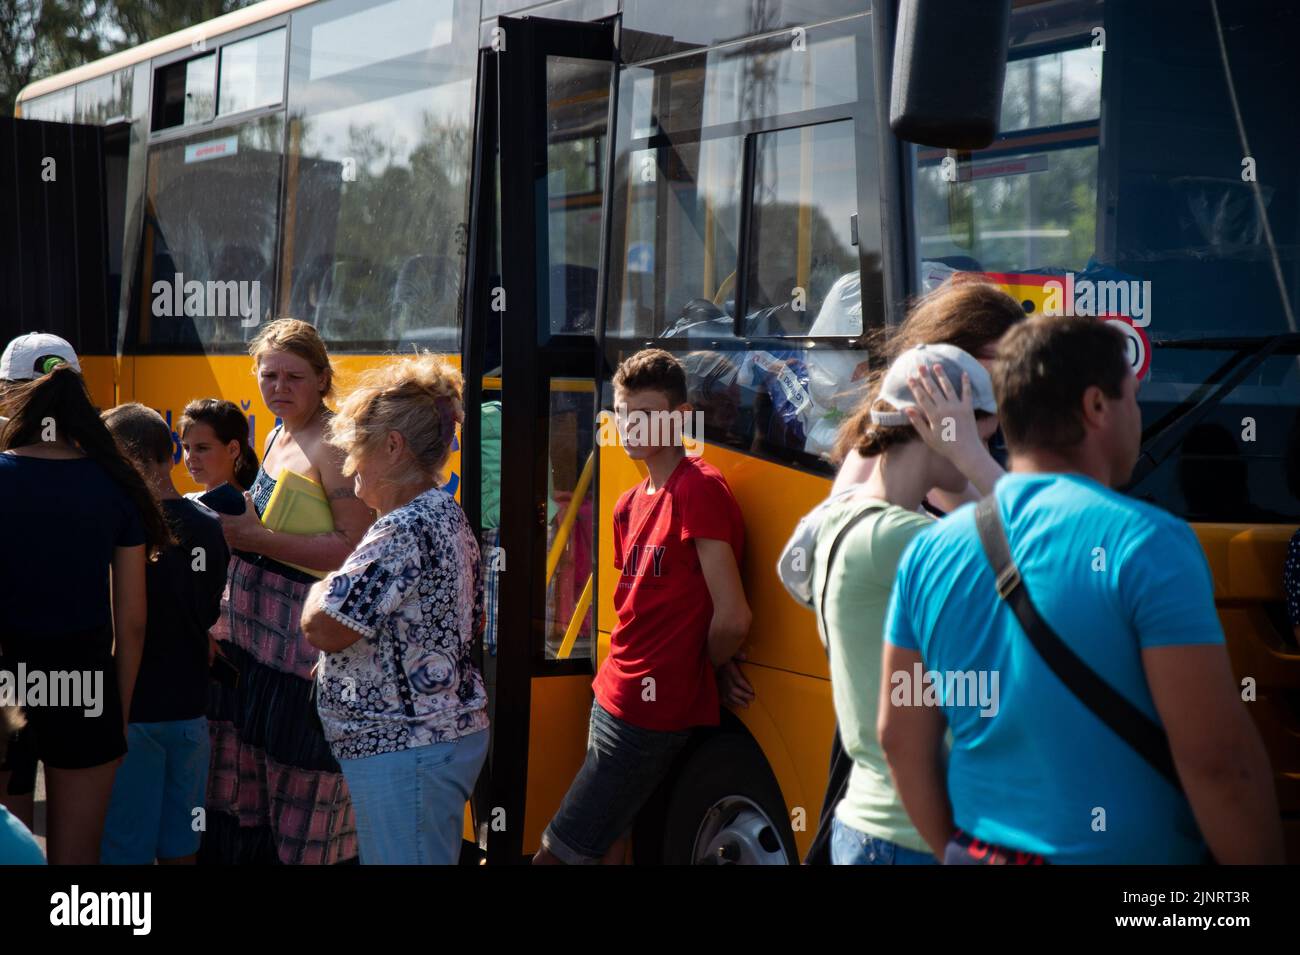 Fleeing the occupied town of Rozovka, a young boy waits near his evacuation bus in Zaporizhzhia. Since the start of the war the city of Zaporizhzhia has set up refugee centers across the city to help with the influx of those escaping the violence. Stock Photo